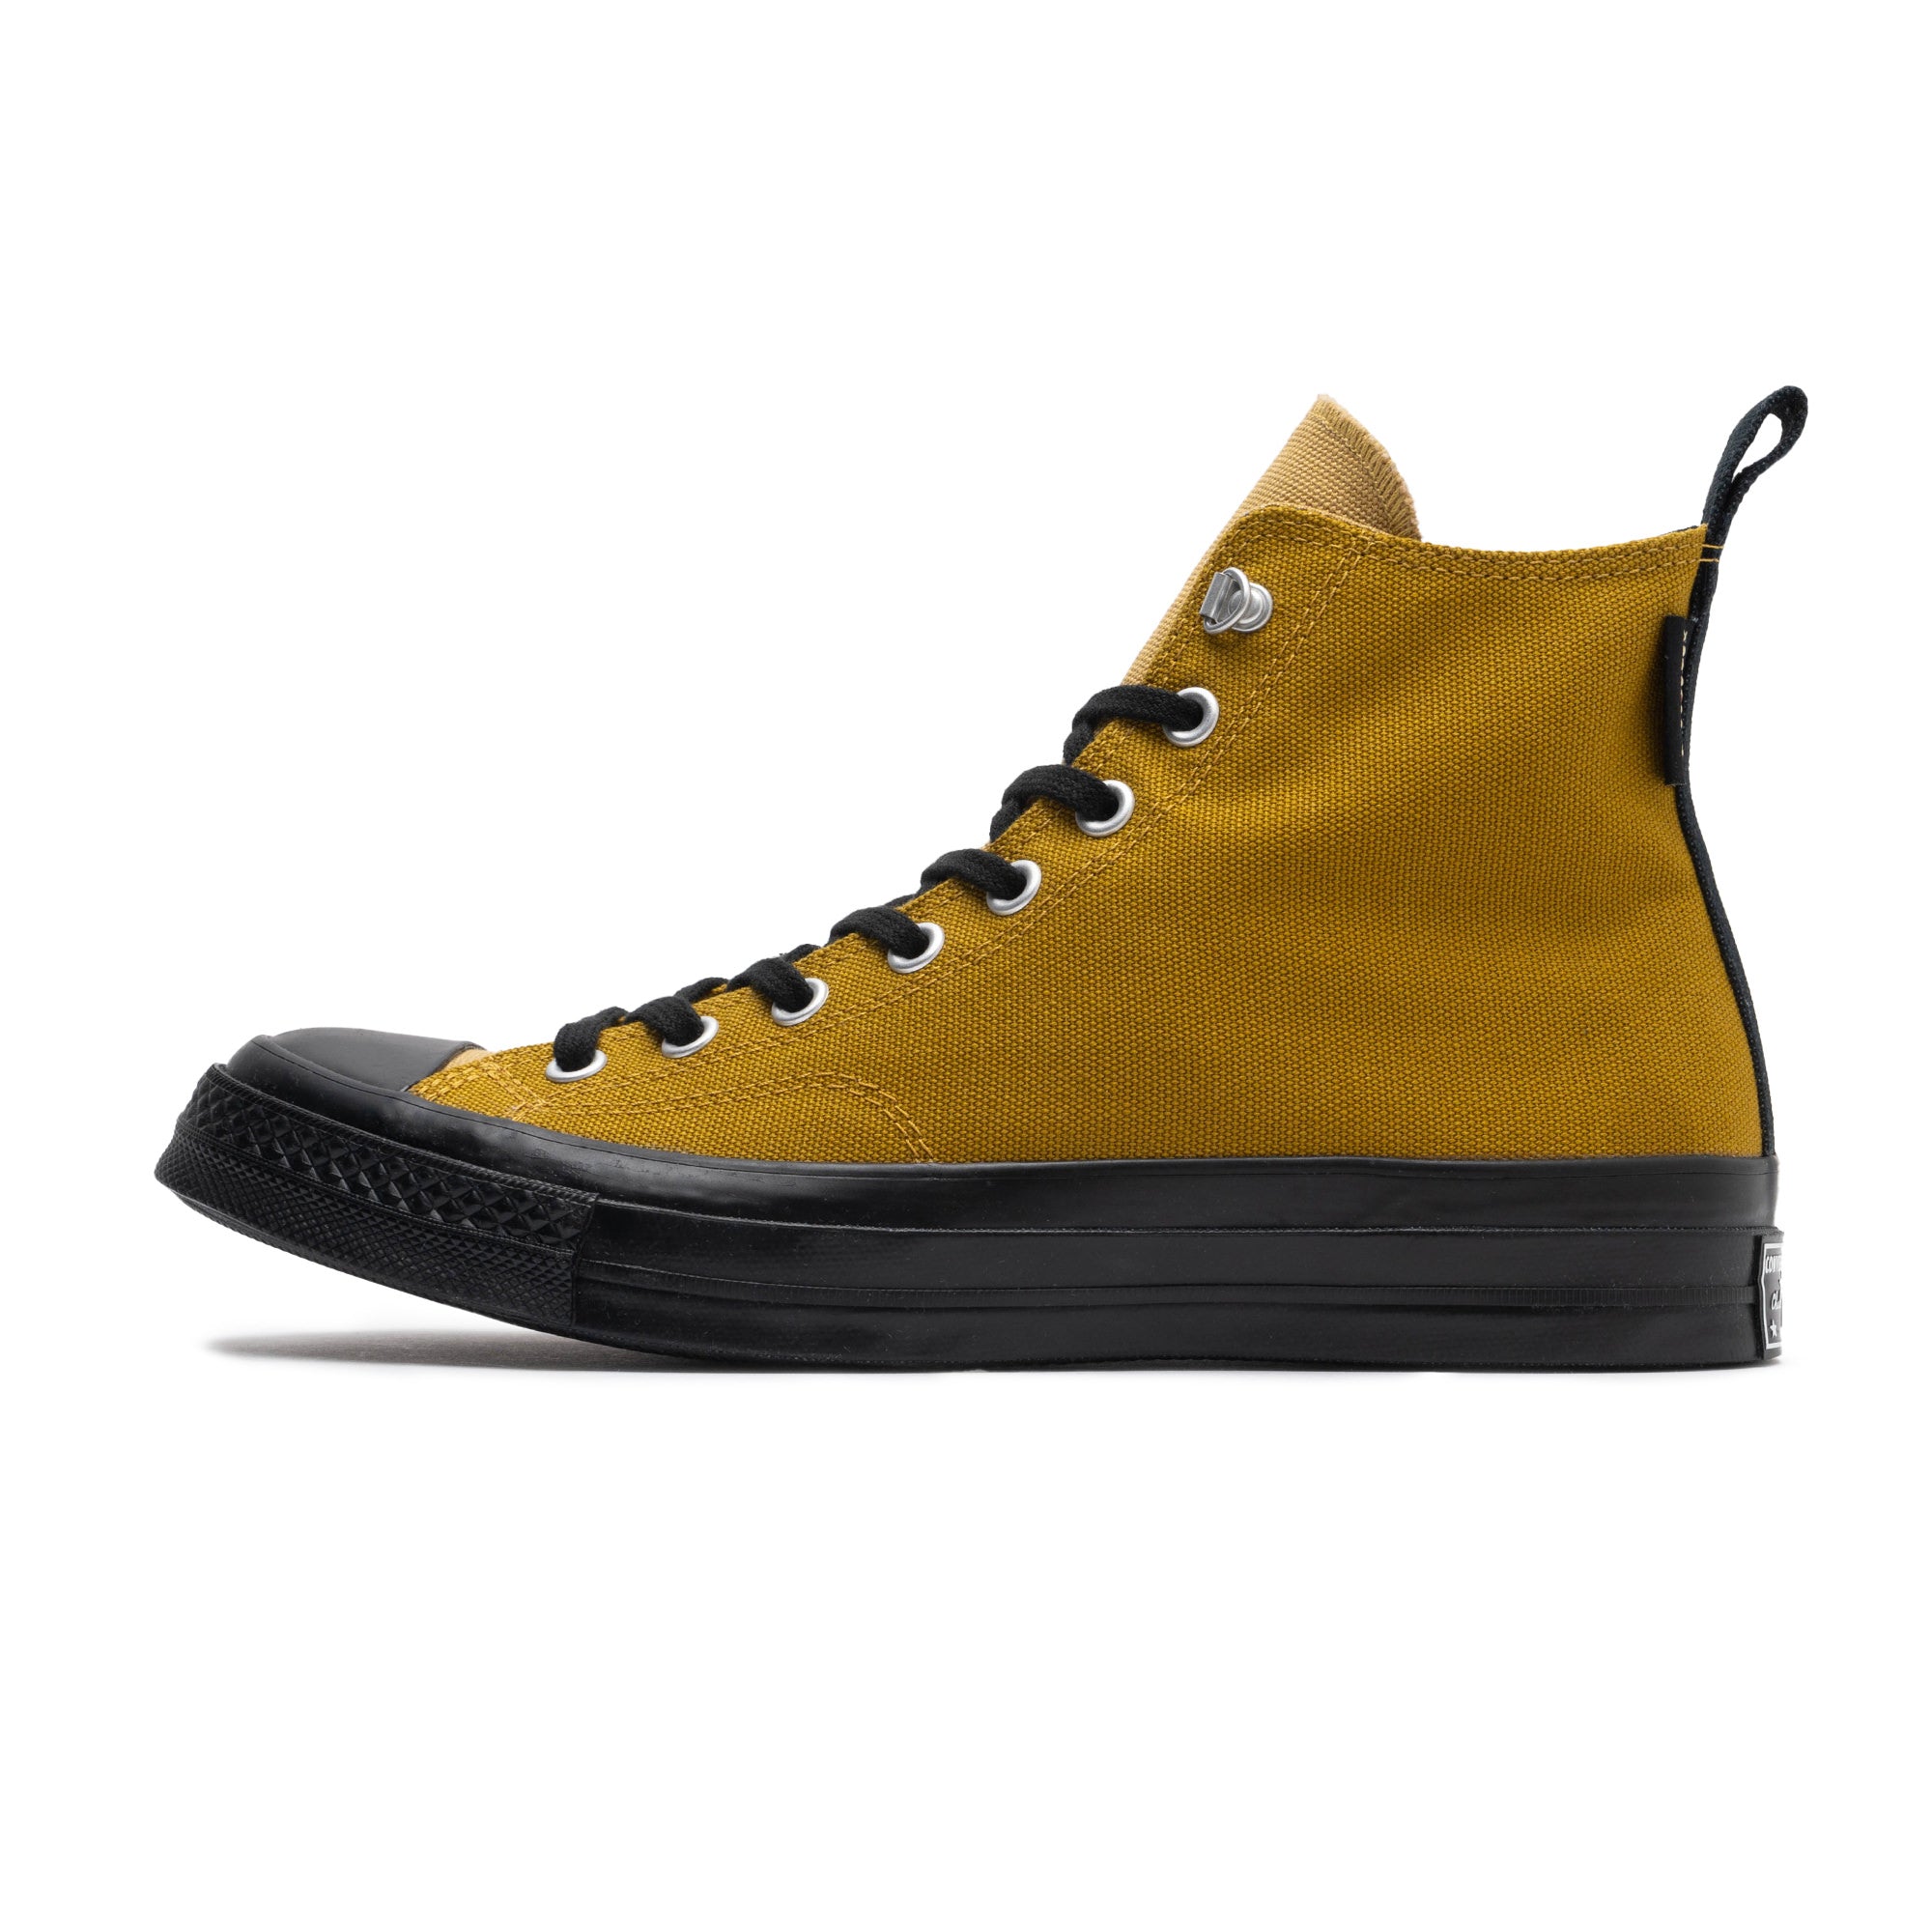 Converse Chuck Taylor All Star Classic Boot Holiday 2012